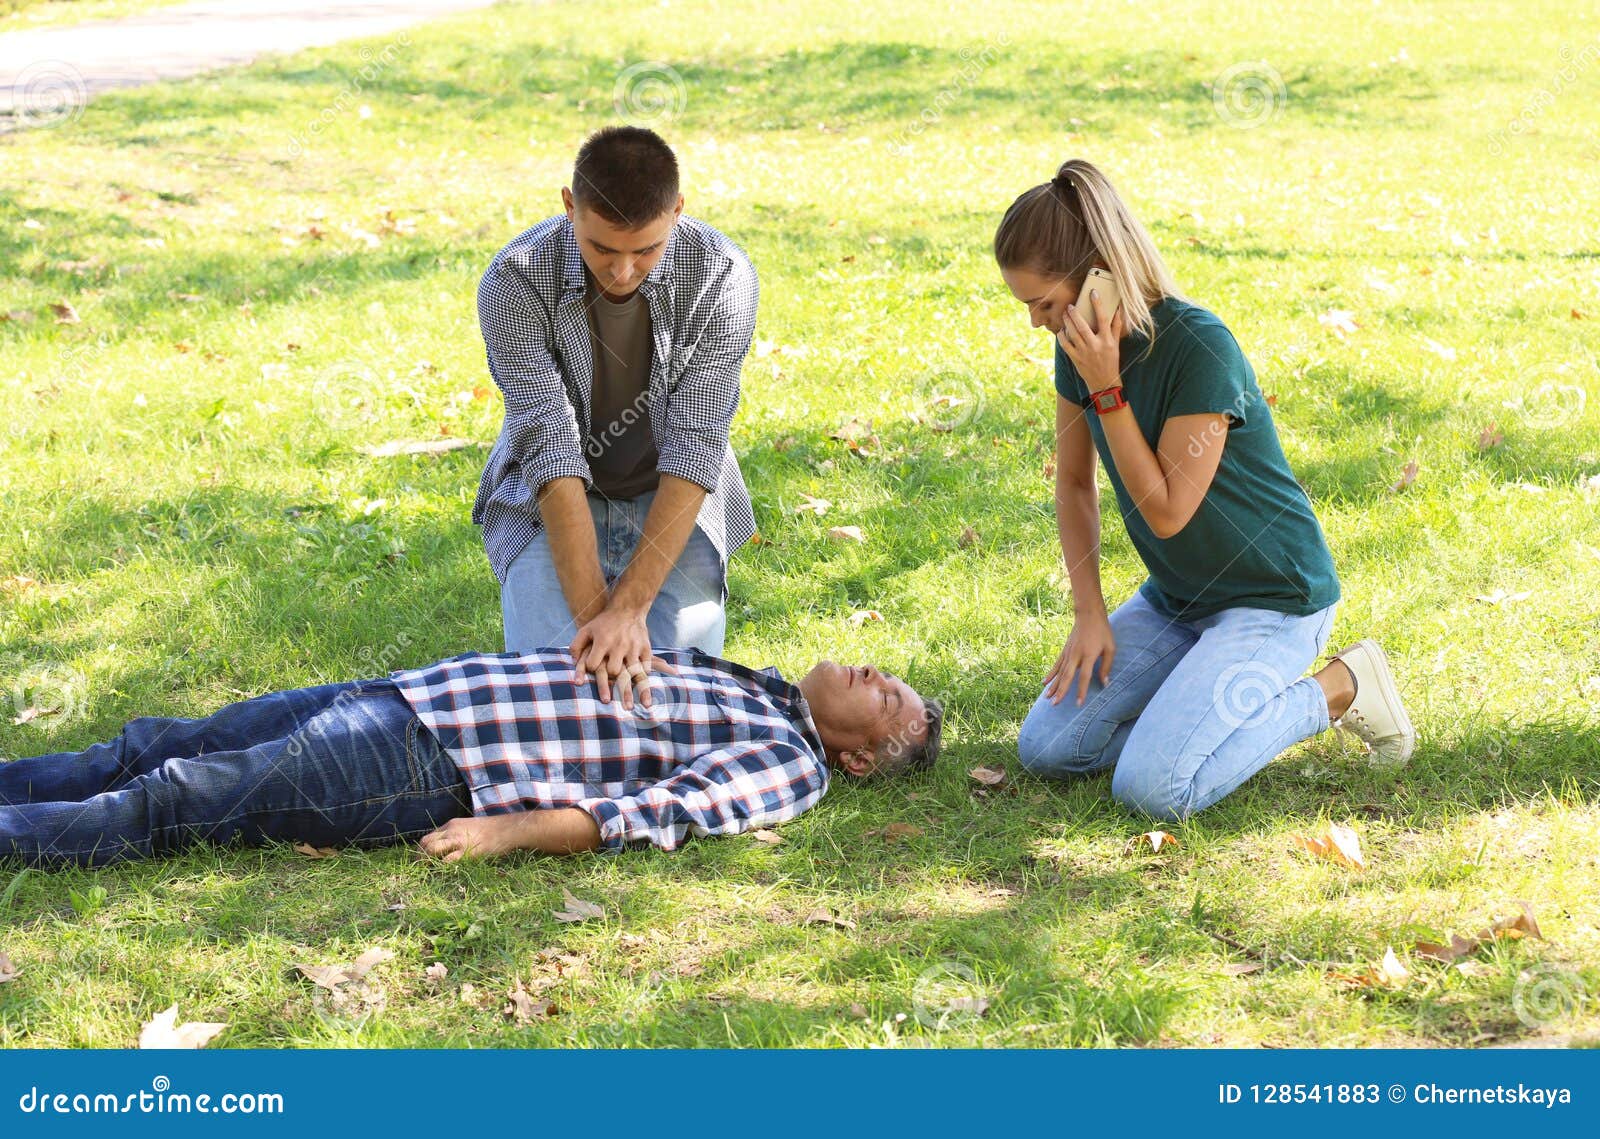 passersby helping unconscious man outdoors. first aid